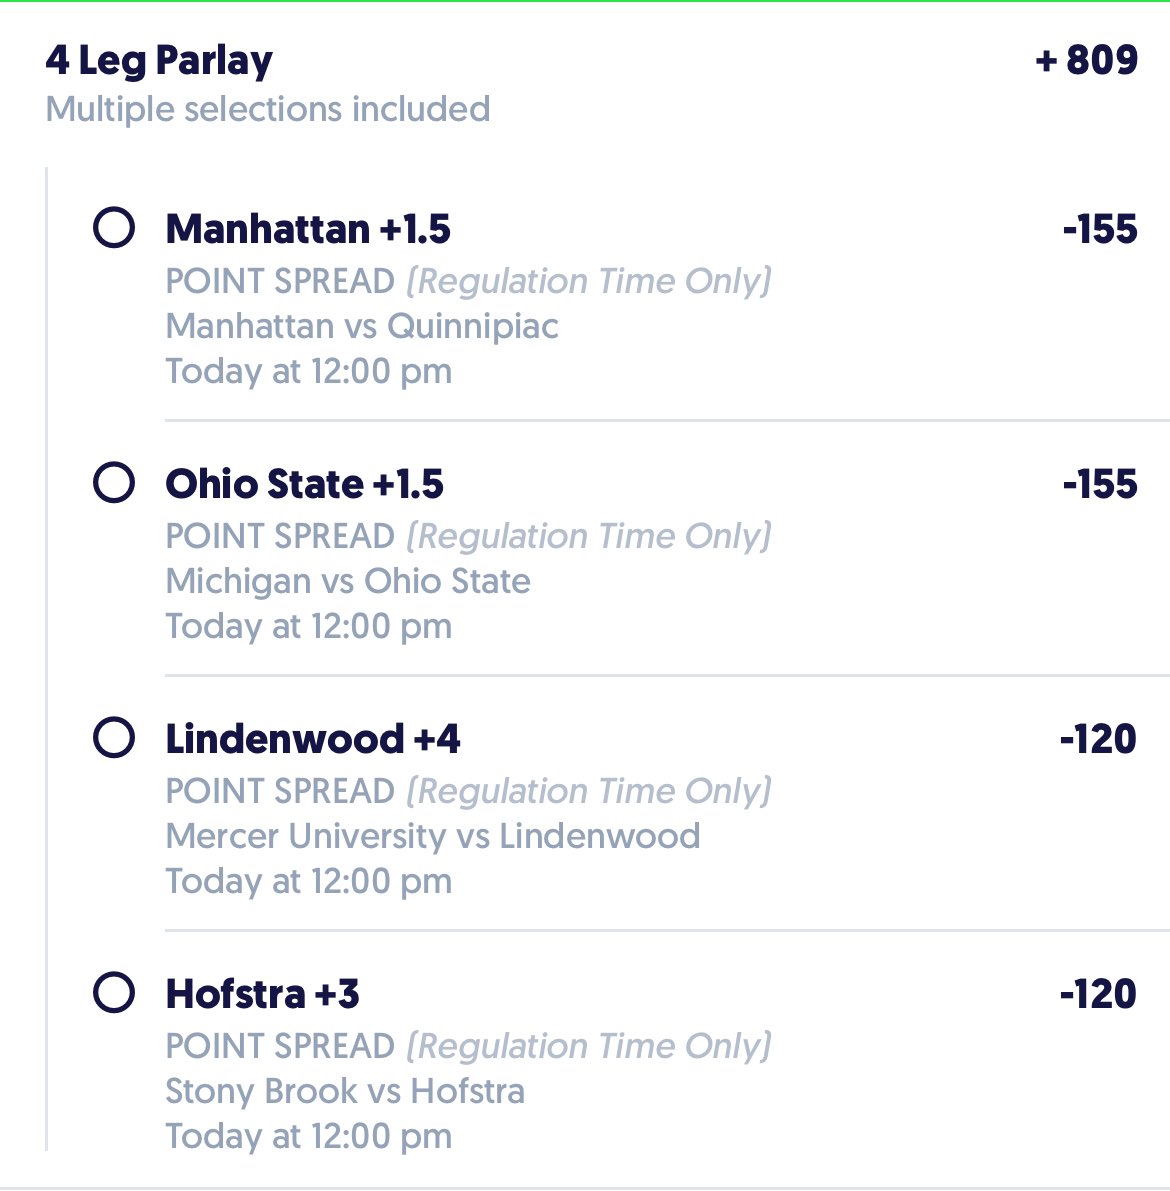 Early slate picks, first one is my top plays, let’s get it! #Fliff #NCAALAX